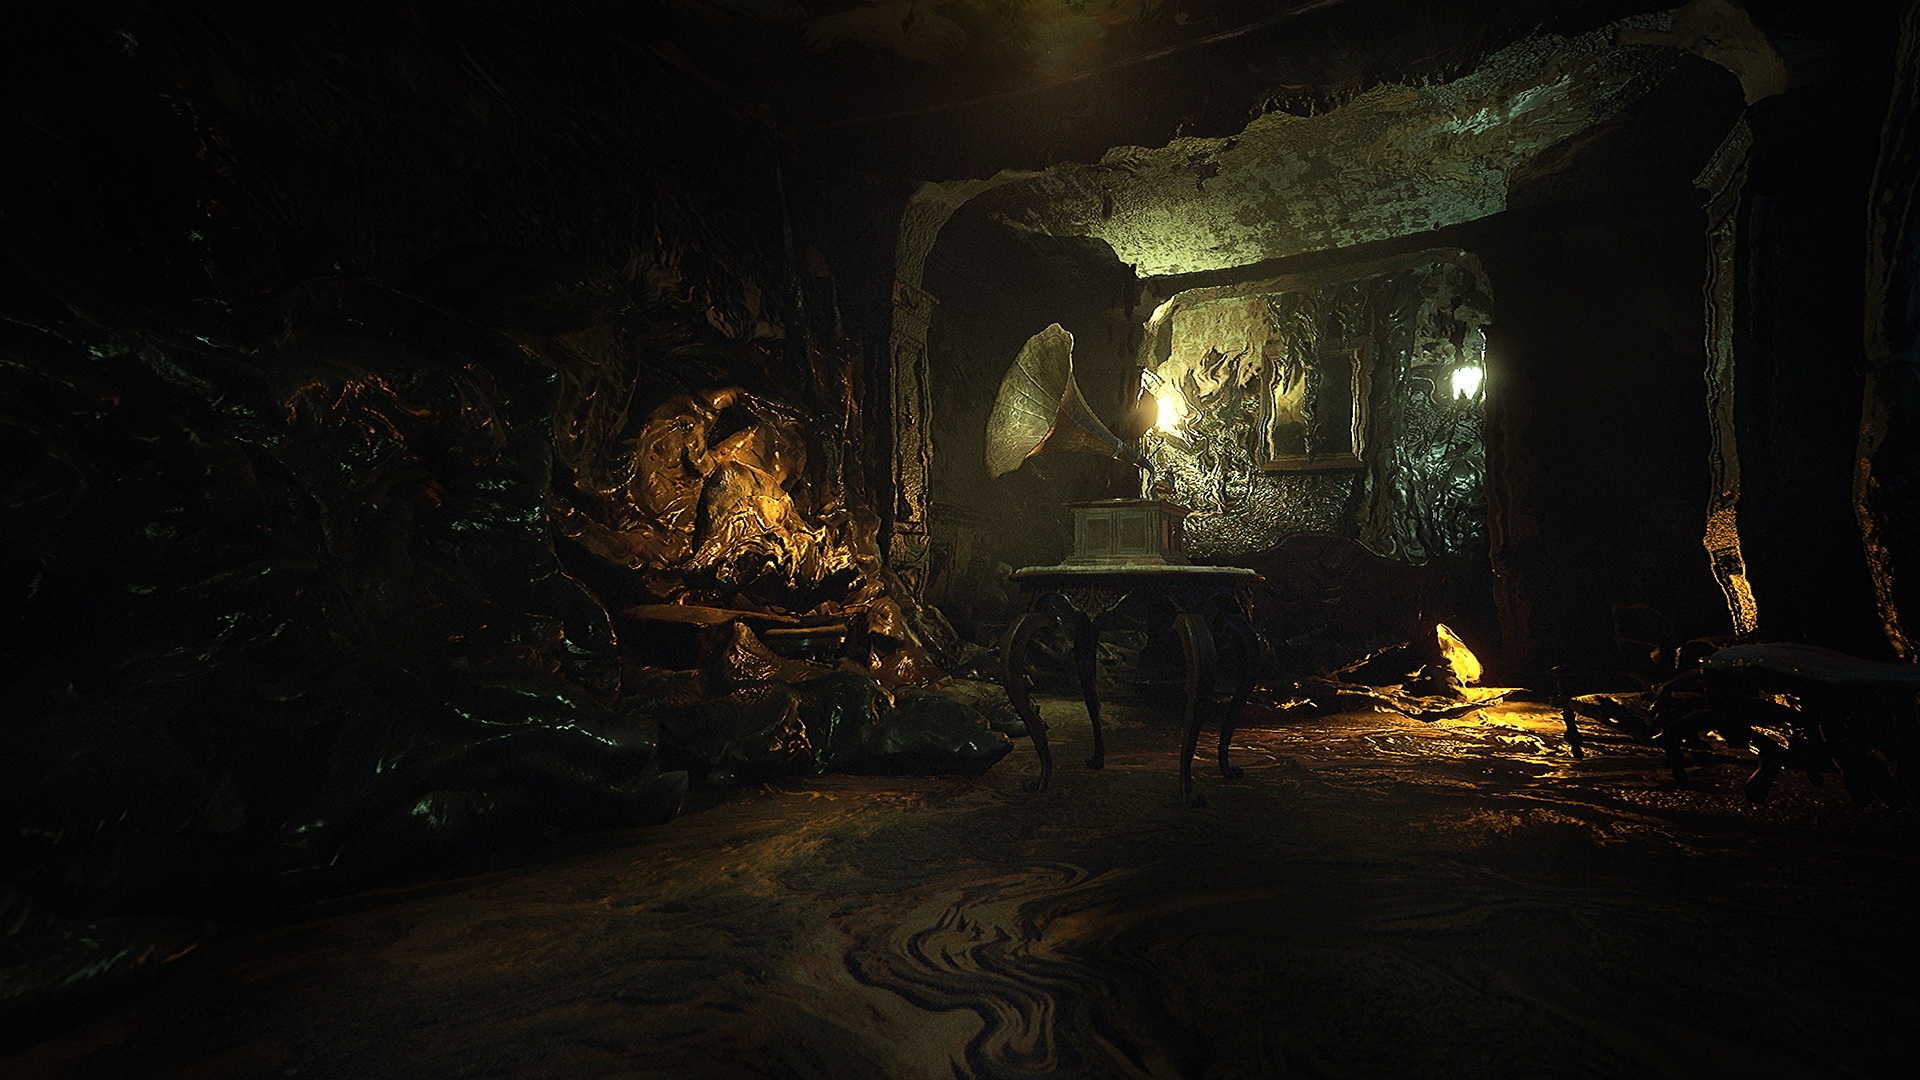 Media asset in full size related to 3dfxzone.it news item entitled as follows: Disponibile su Steam la demo di Layers of Fear che utilizza Unreal Engine 5 | Image Name: news34483_Layers-of-Fear_Screenshot_1.jpg